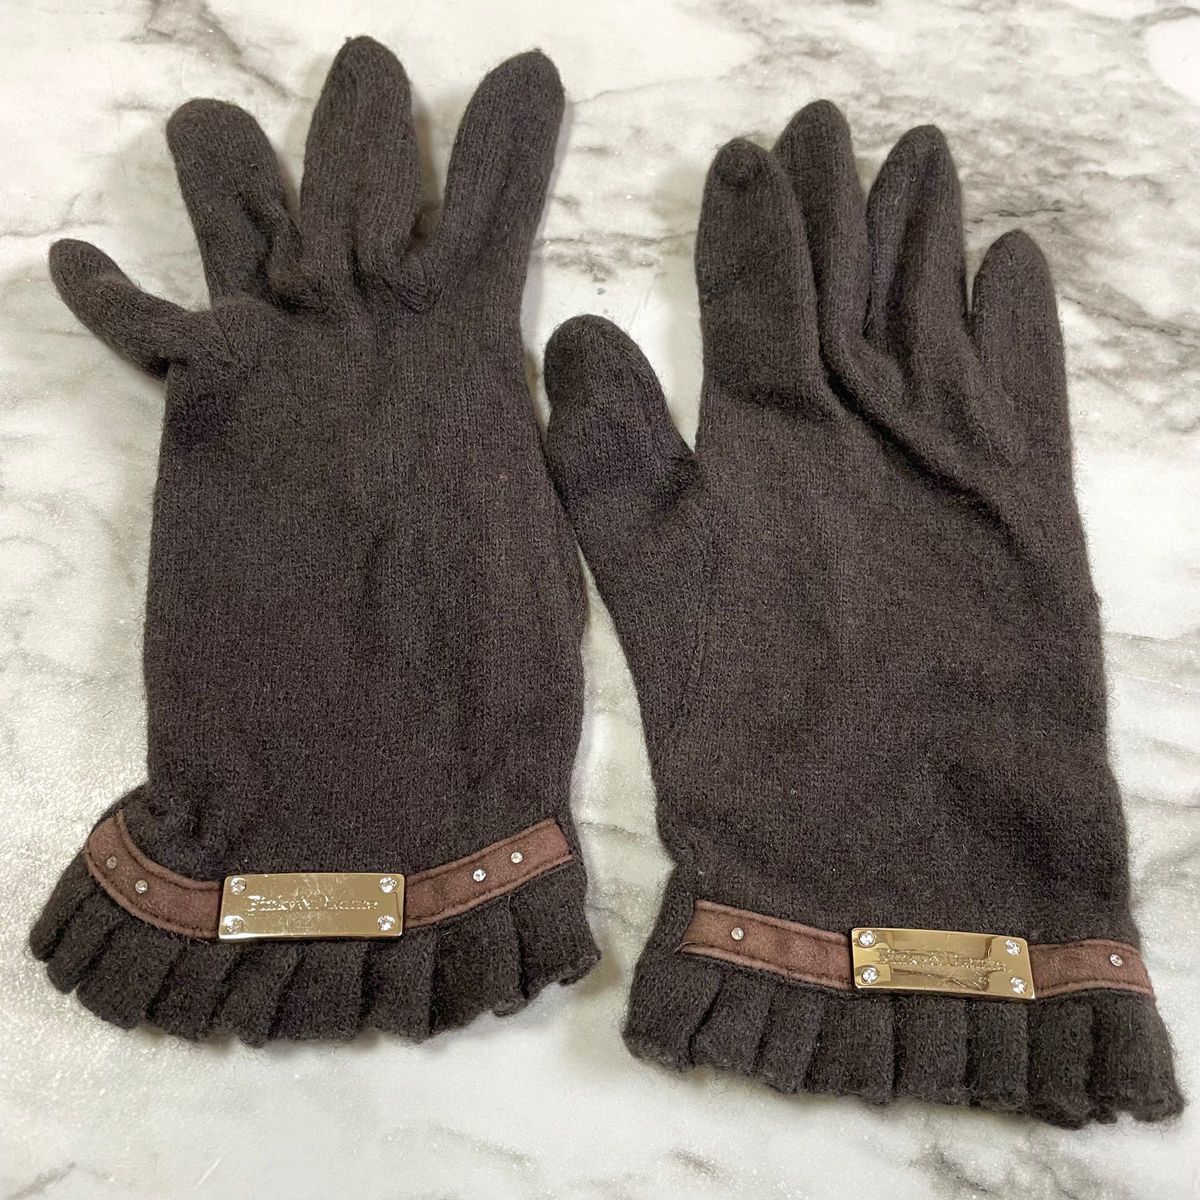  beautiful hand small is seen Pinky&Dianne Pinky & Diane lady's gloves glove and bai protection against cold S M Brown 